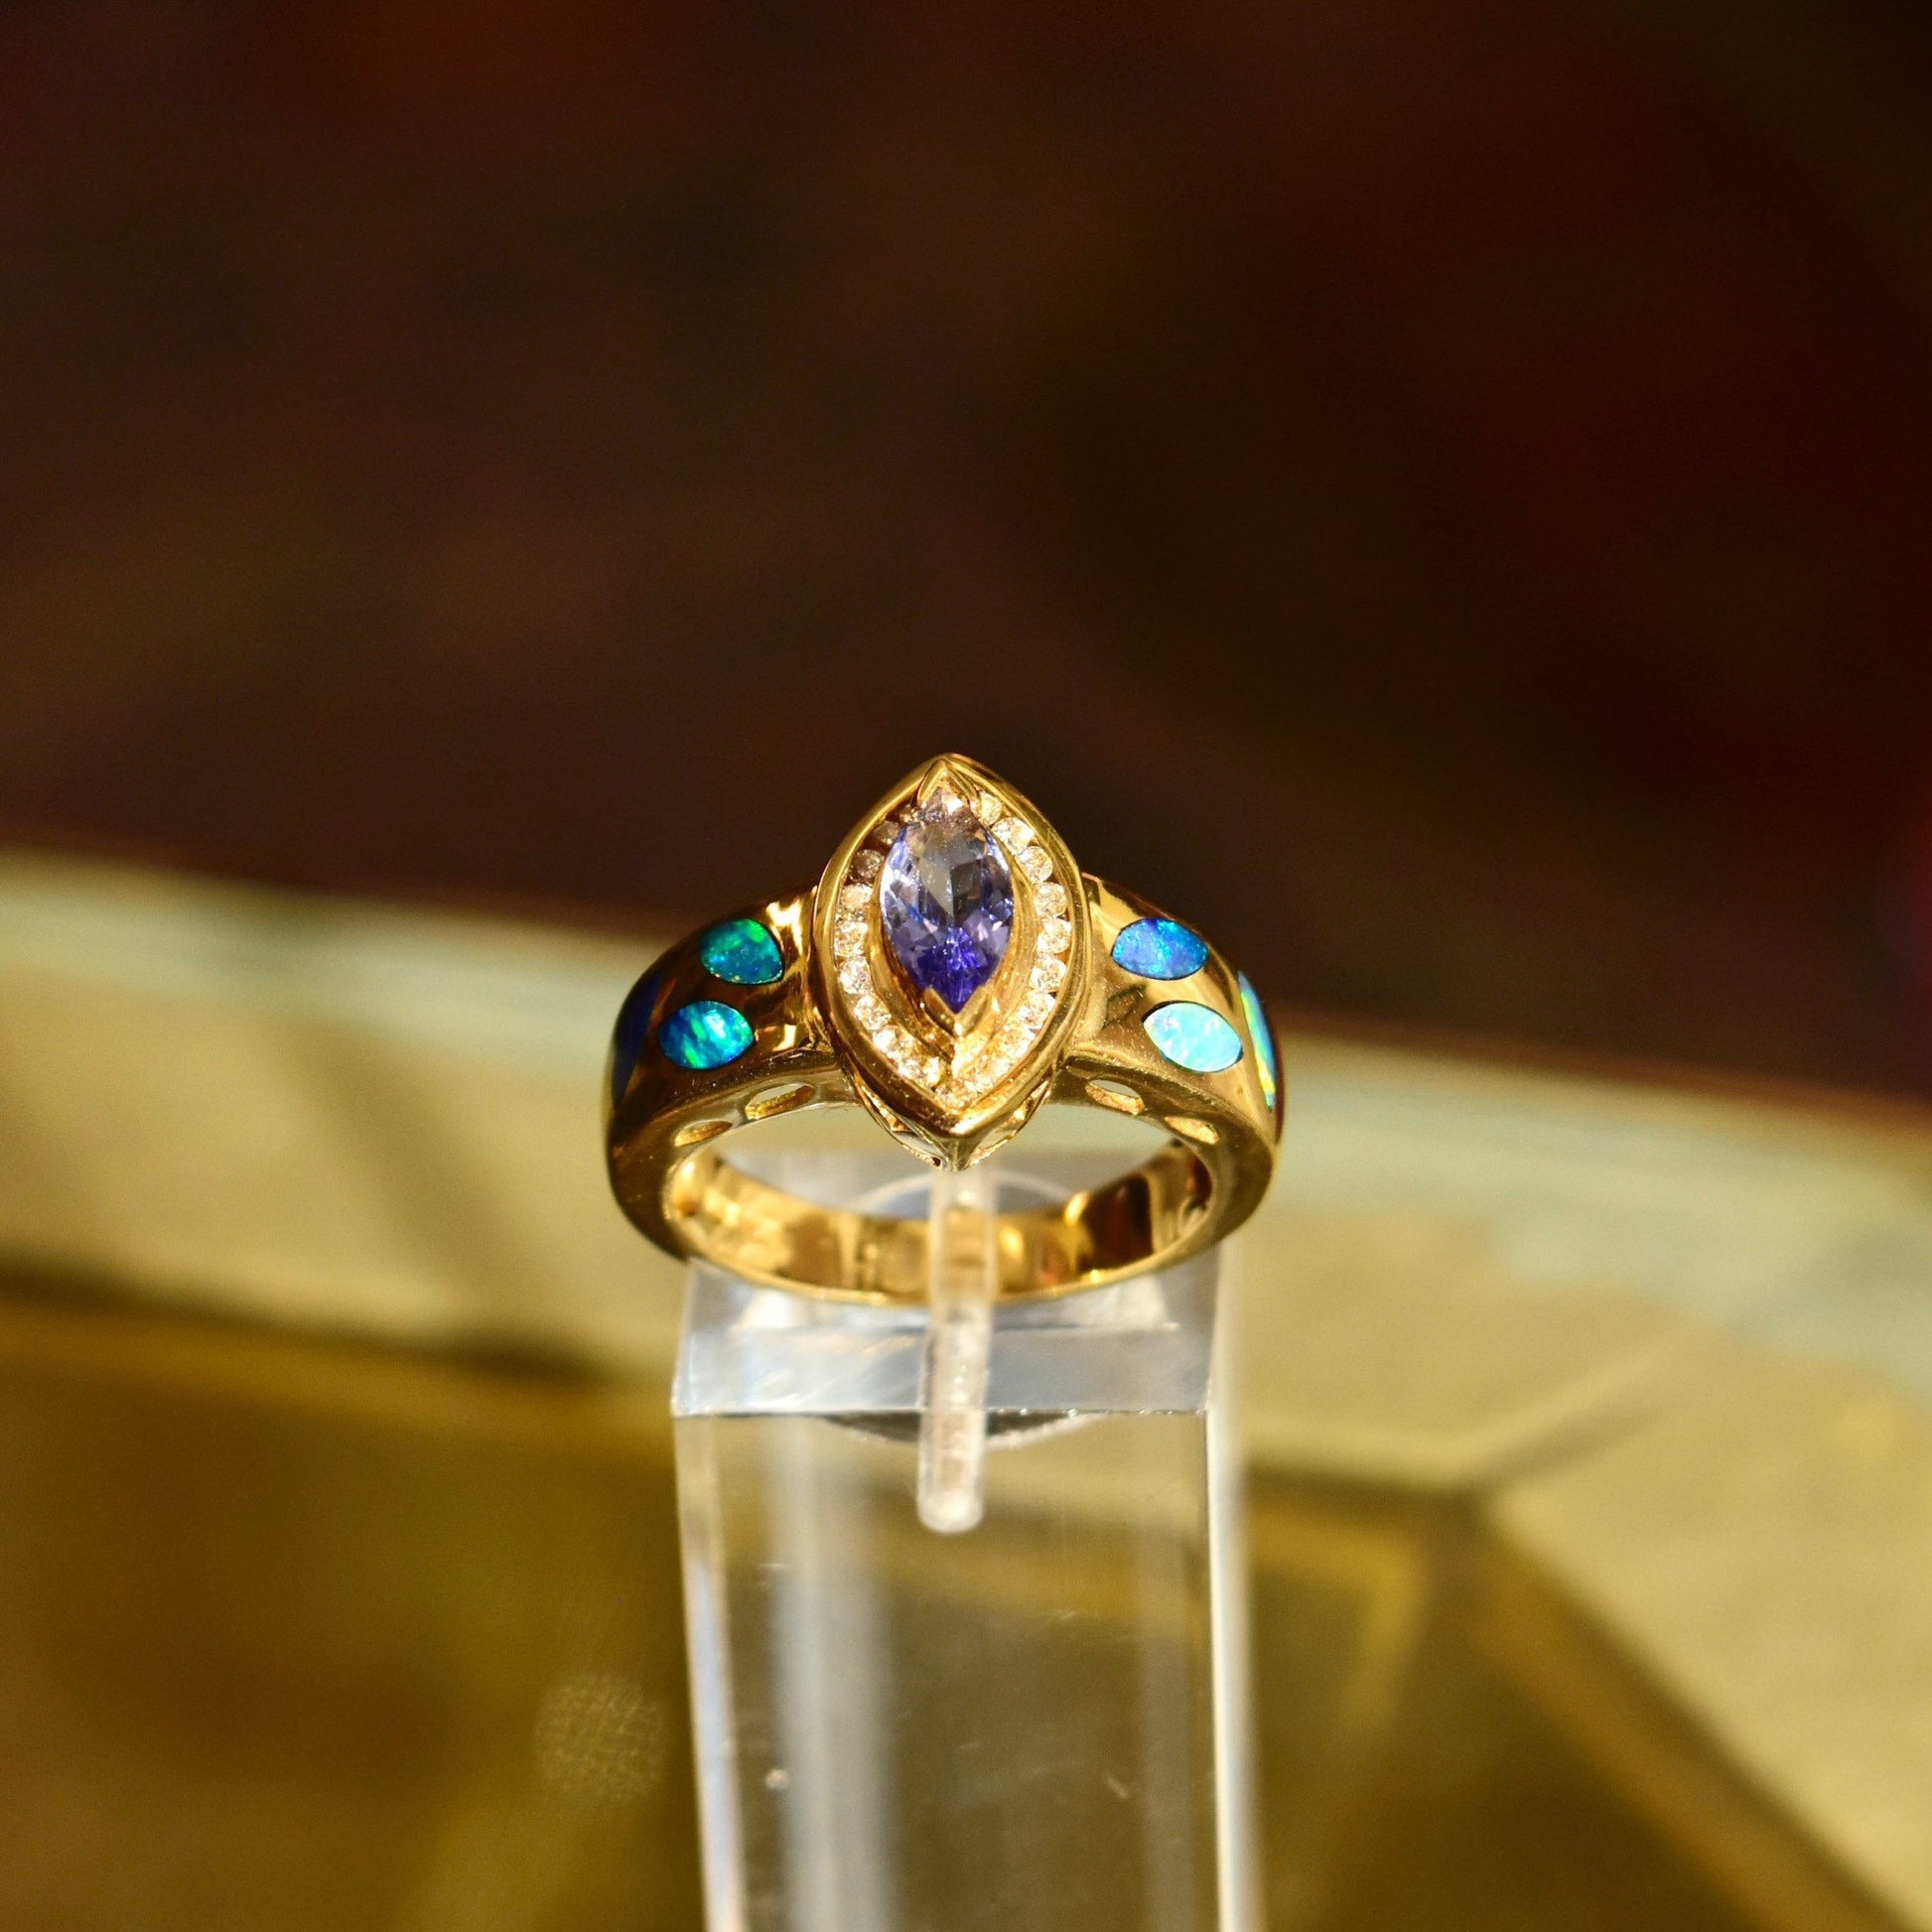 14K gold cocktail ring featuring a marquise-cut tanzanite center stone accented by a diamond halo and vibrant blue opal inlays, shown on a neutral fabric background.